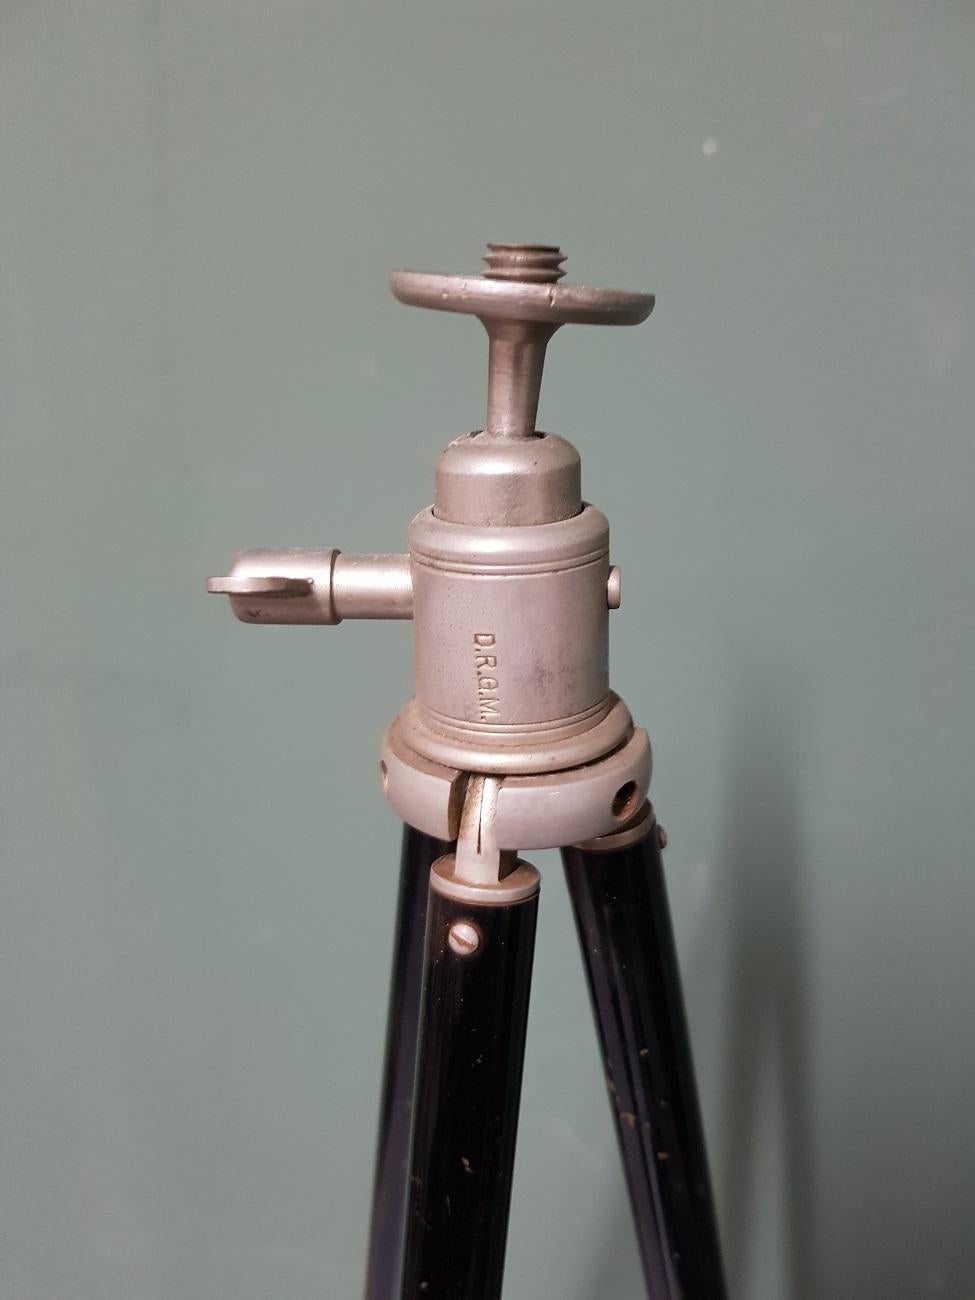 Old French brass camera tripod with ball joint and original leather case, working well and from the first half of the 20th century.

The measurements are,
Depth 40 cm/ 15.7 inch.
Width 40 cm/ 15.7 inch.
Height 120 cm/ 47.2 inch.